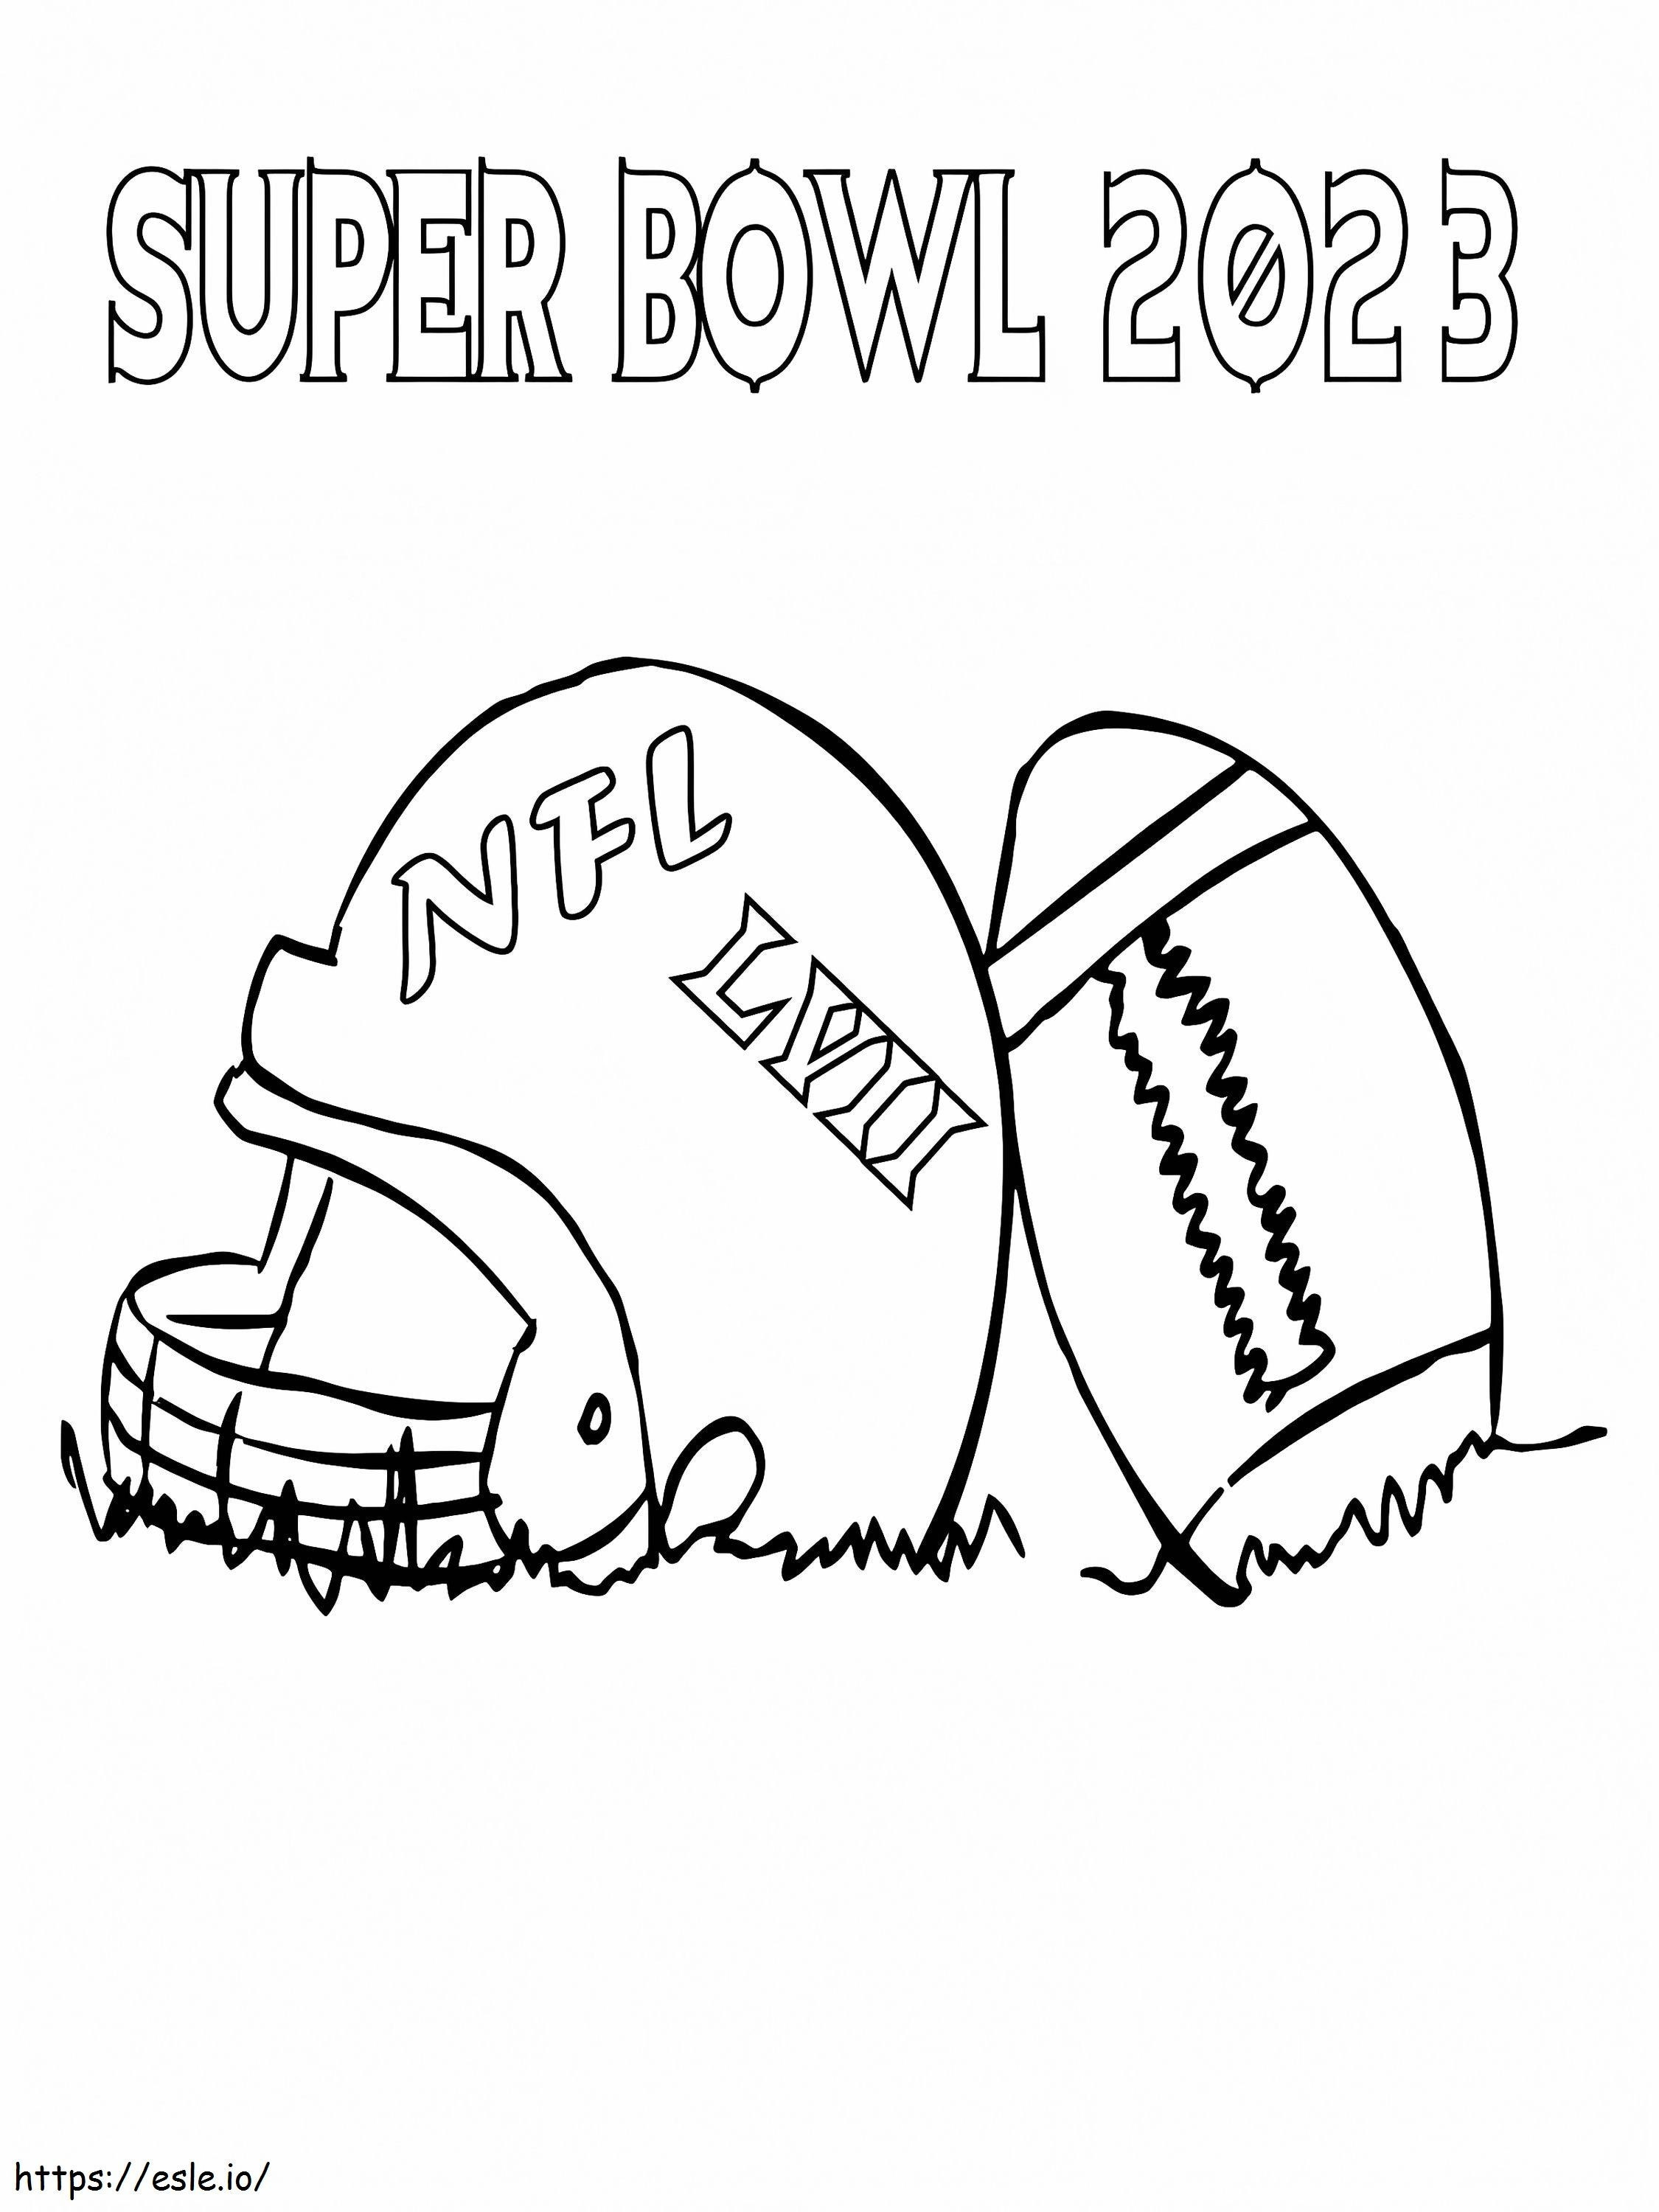 Nfl 2023 Helmet And Ball coloring page